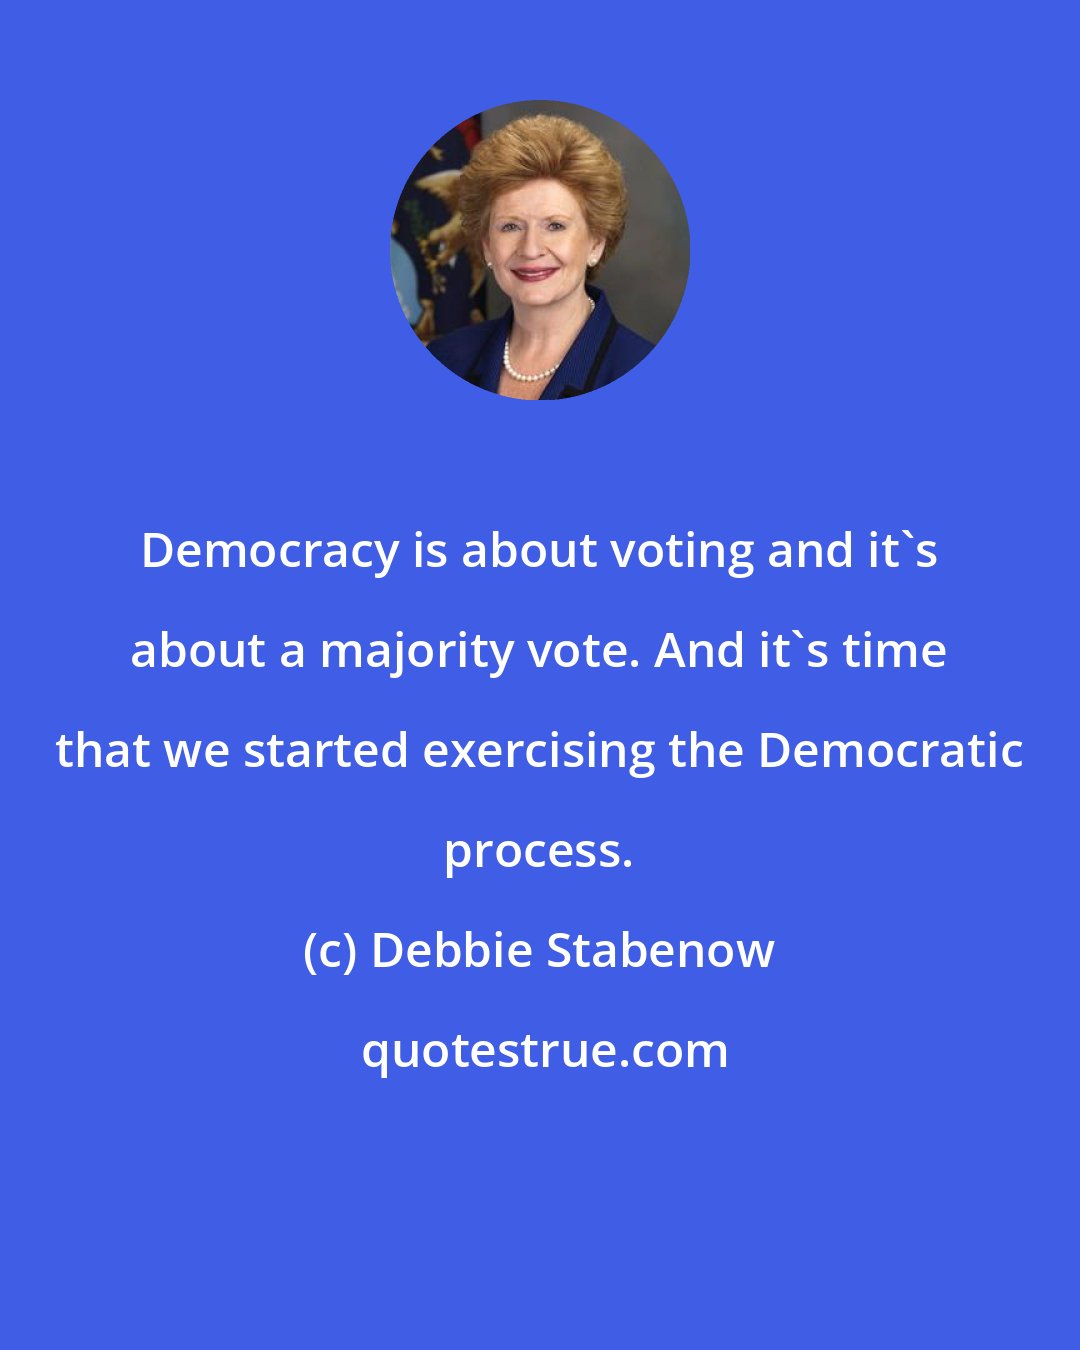 Debbie Stabenow: Democracy is about voting and it's about a majority vote. And it's time that we started exercising the Democratic process.